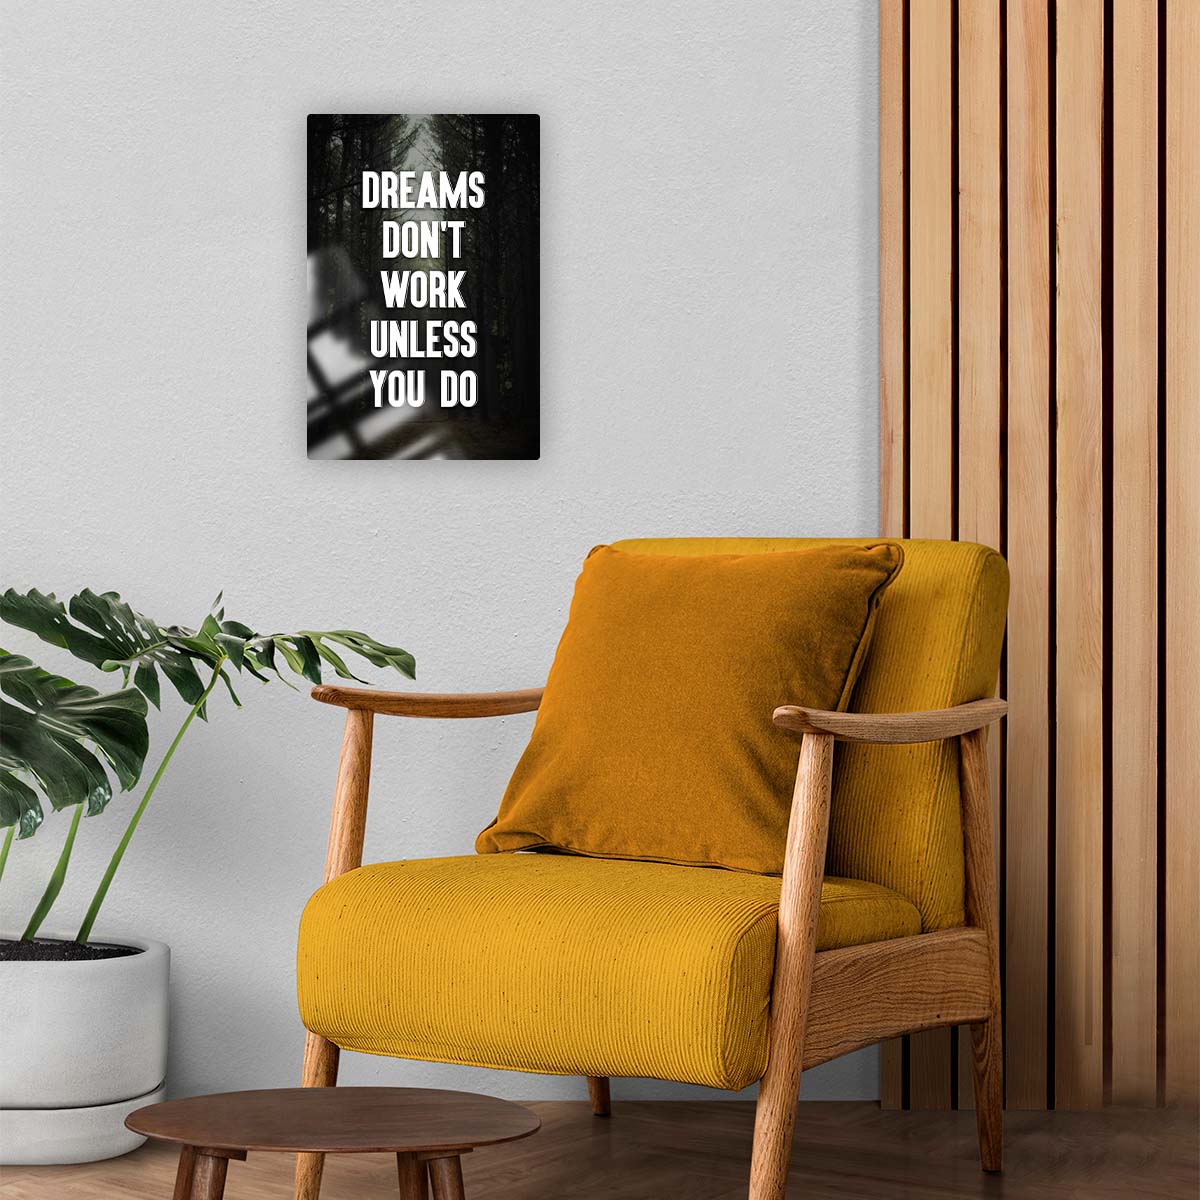 Dreams Don't Work Unless You Do - Metal Poster